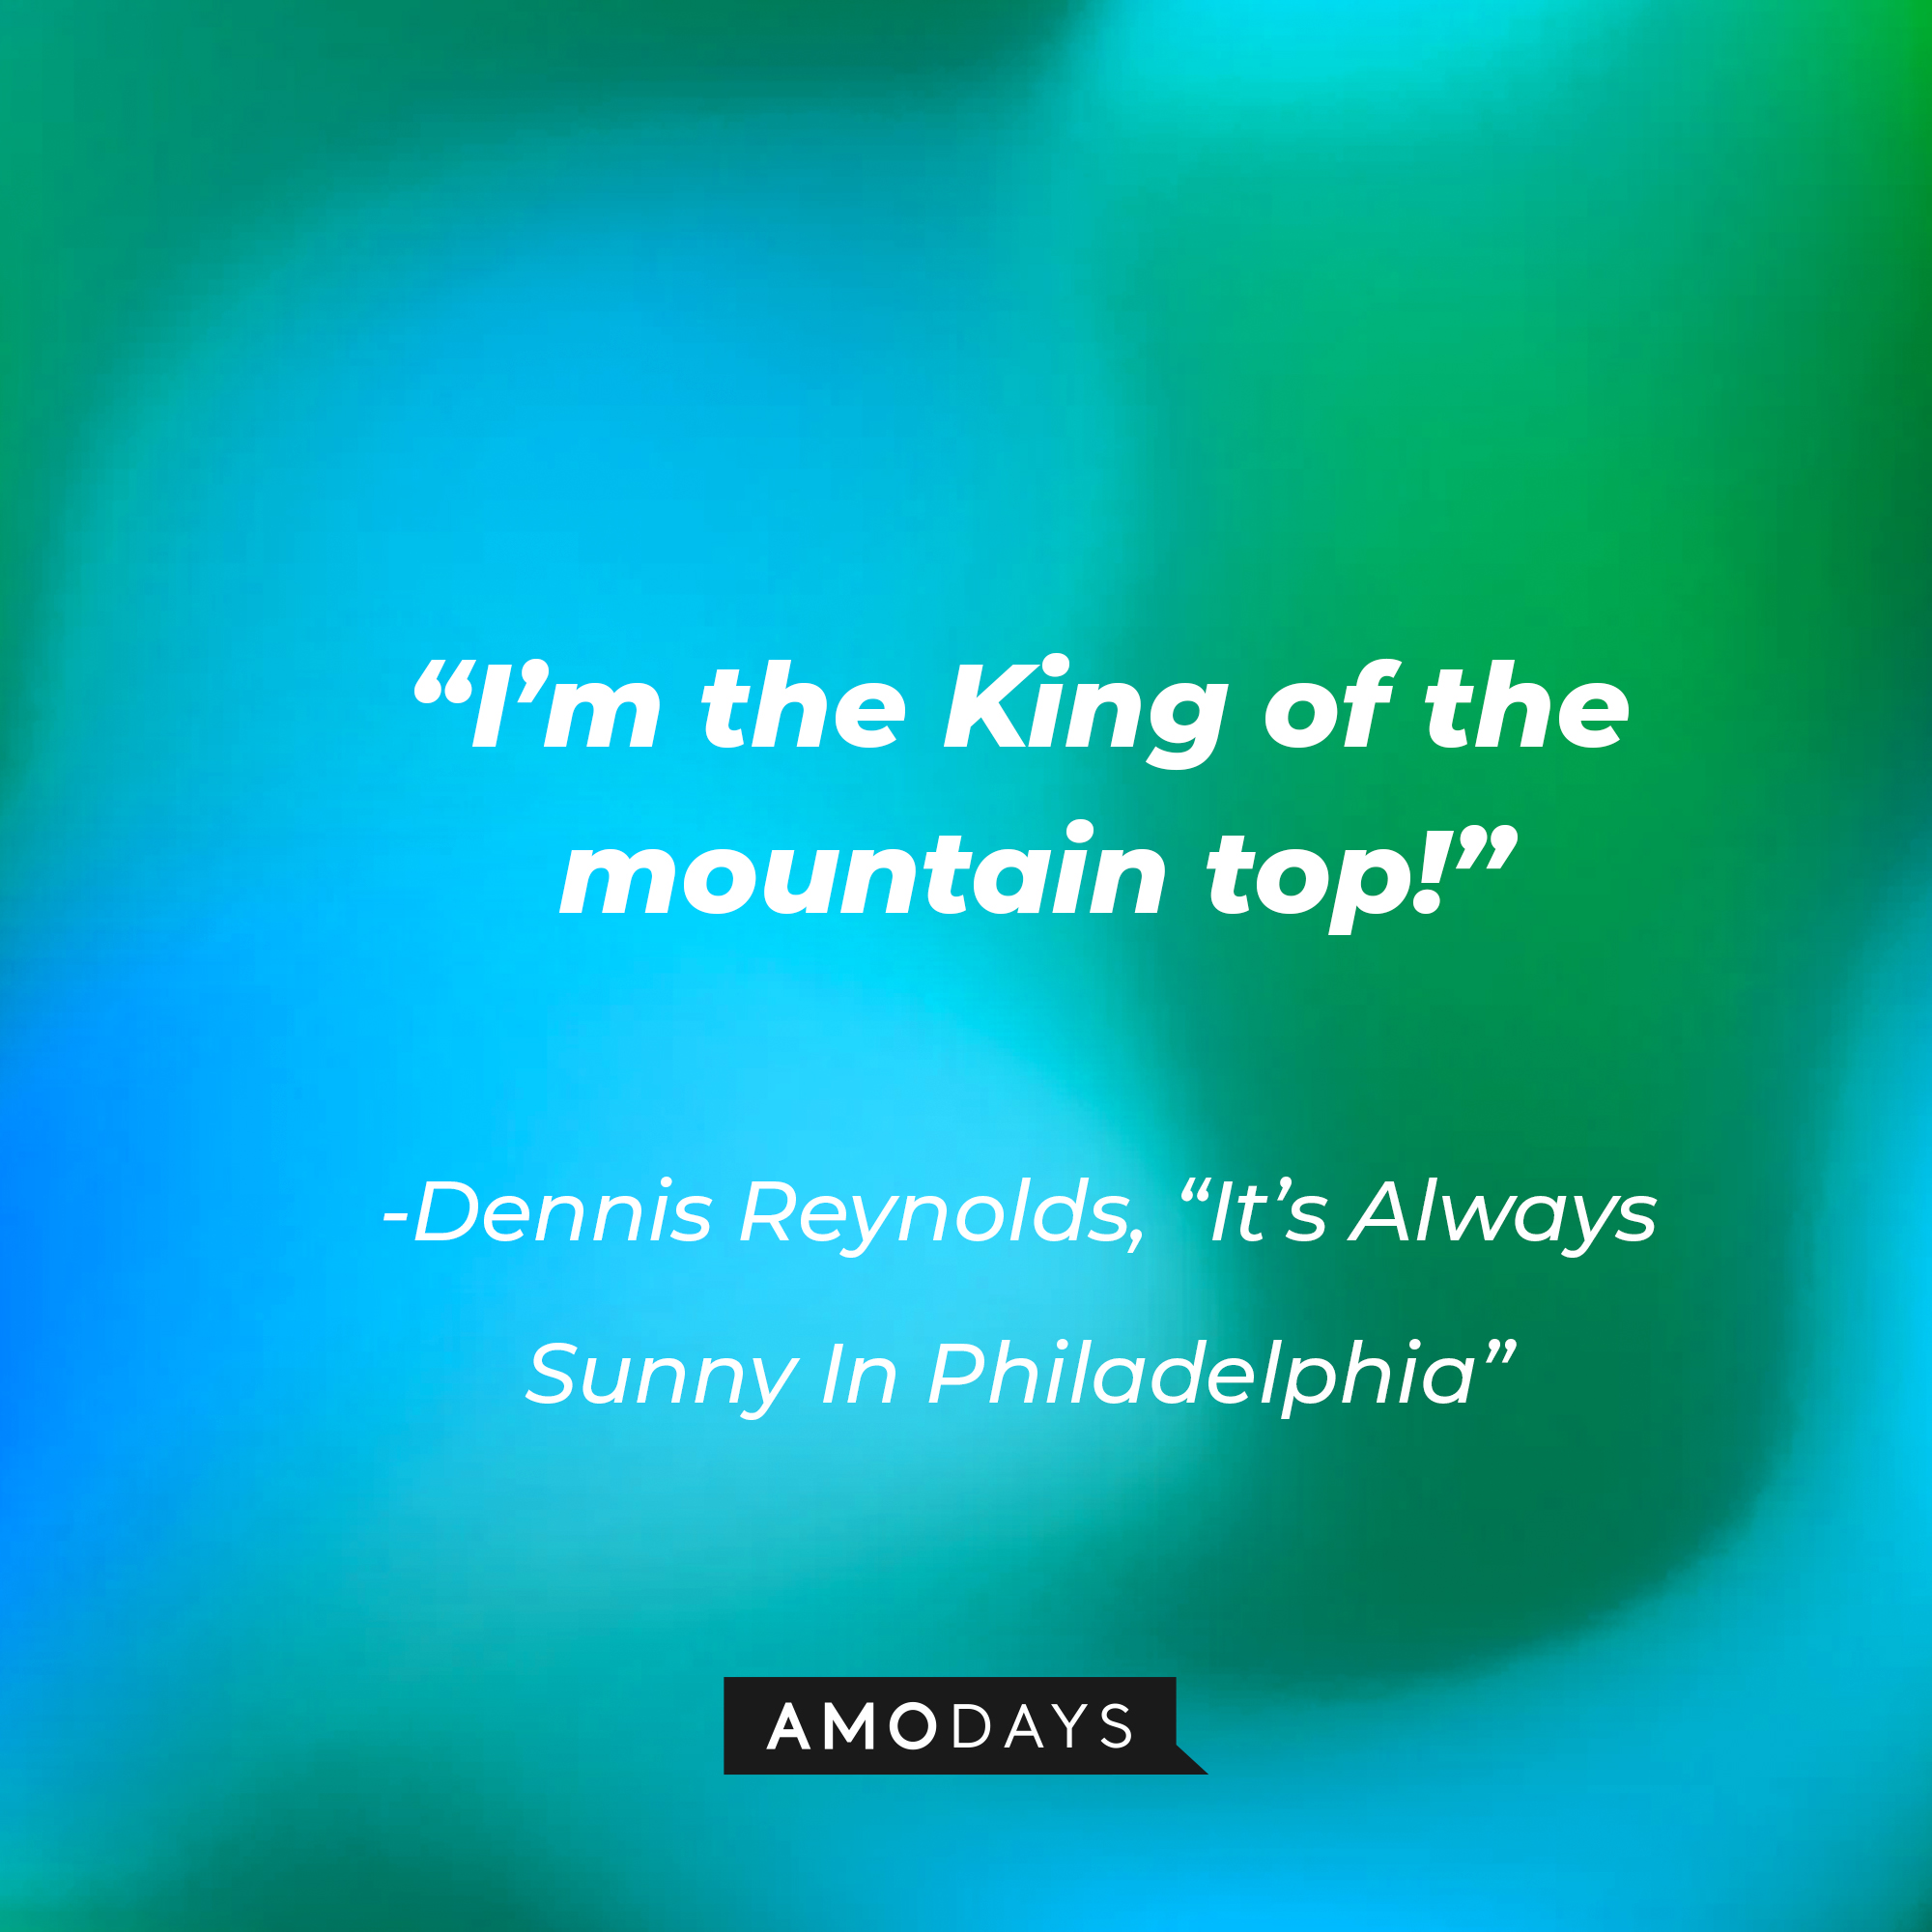 Dennis Reynolds’ quote from "It’s Always Sunny In Philadelphia": “I’m the King of the mountain top!” | Source: AmoDays